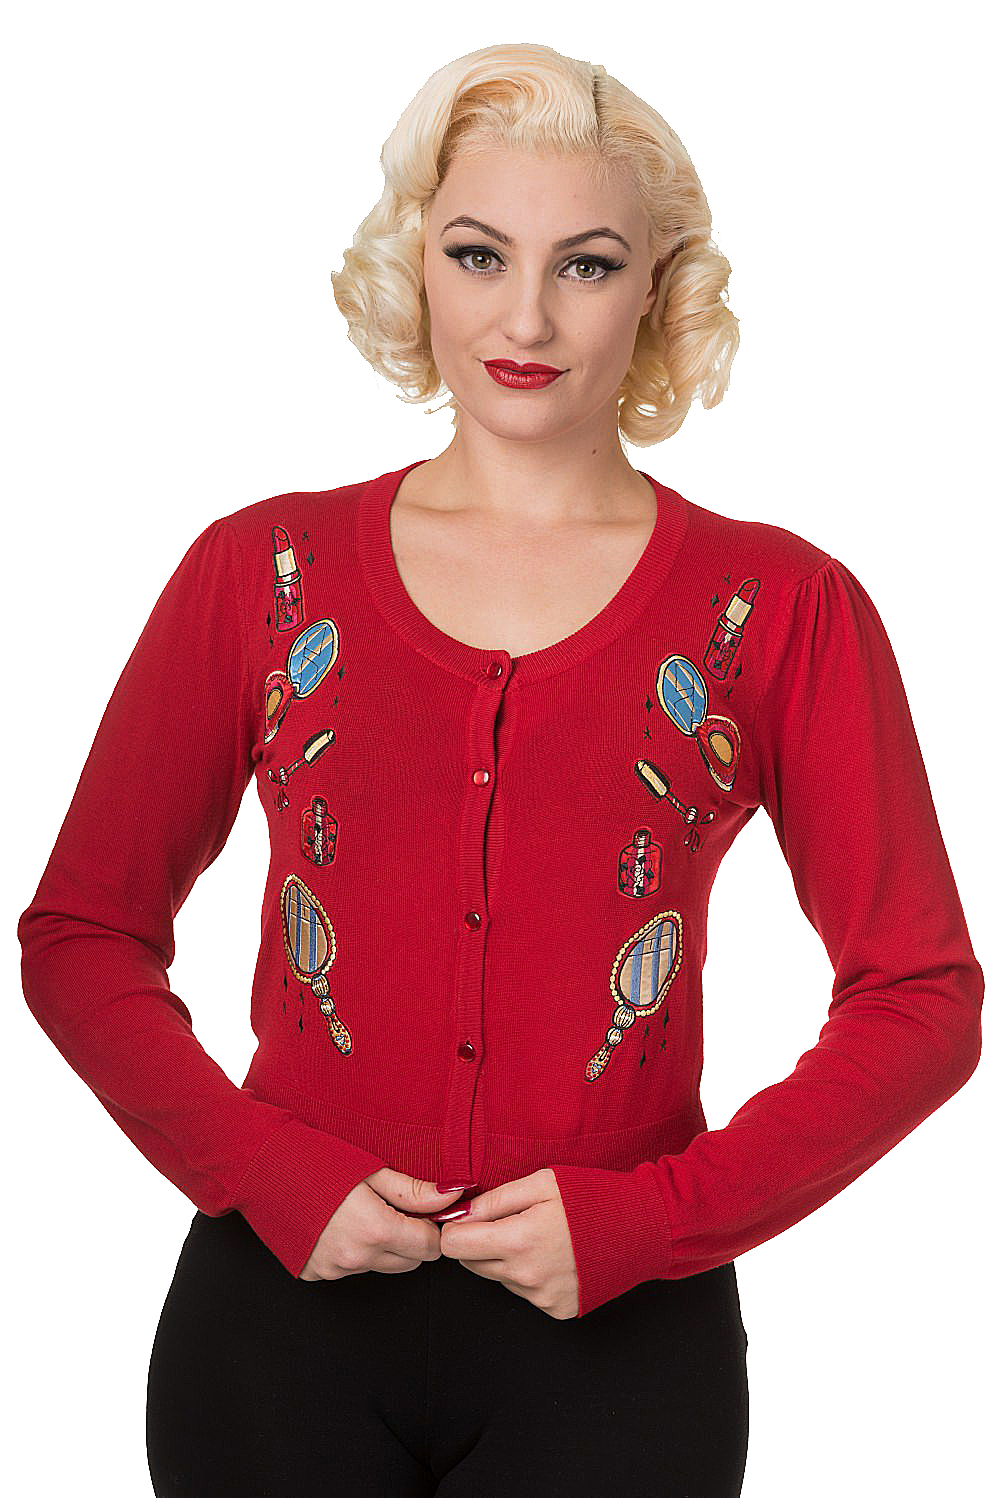 Banned Red Vintage Perfume Cardigan | Fitted 1950s Retro Cardigan ...